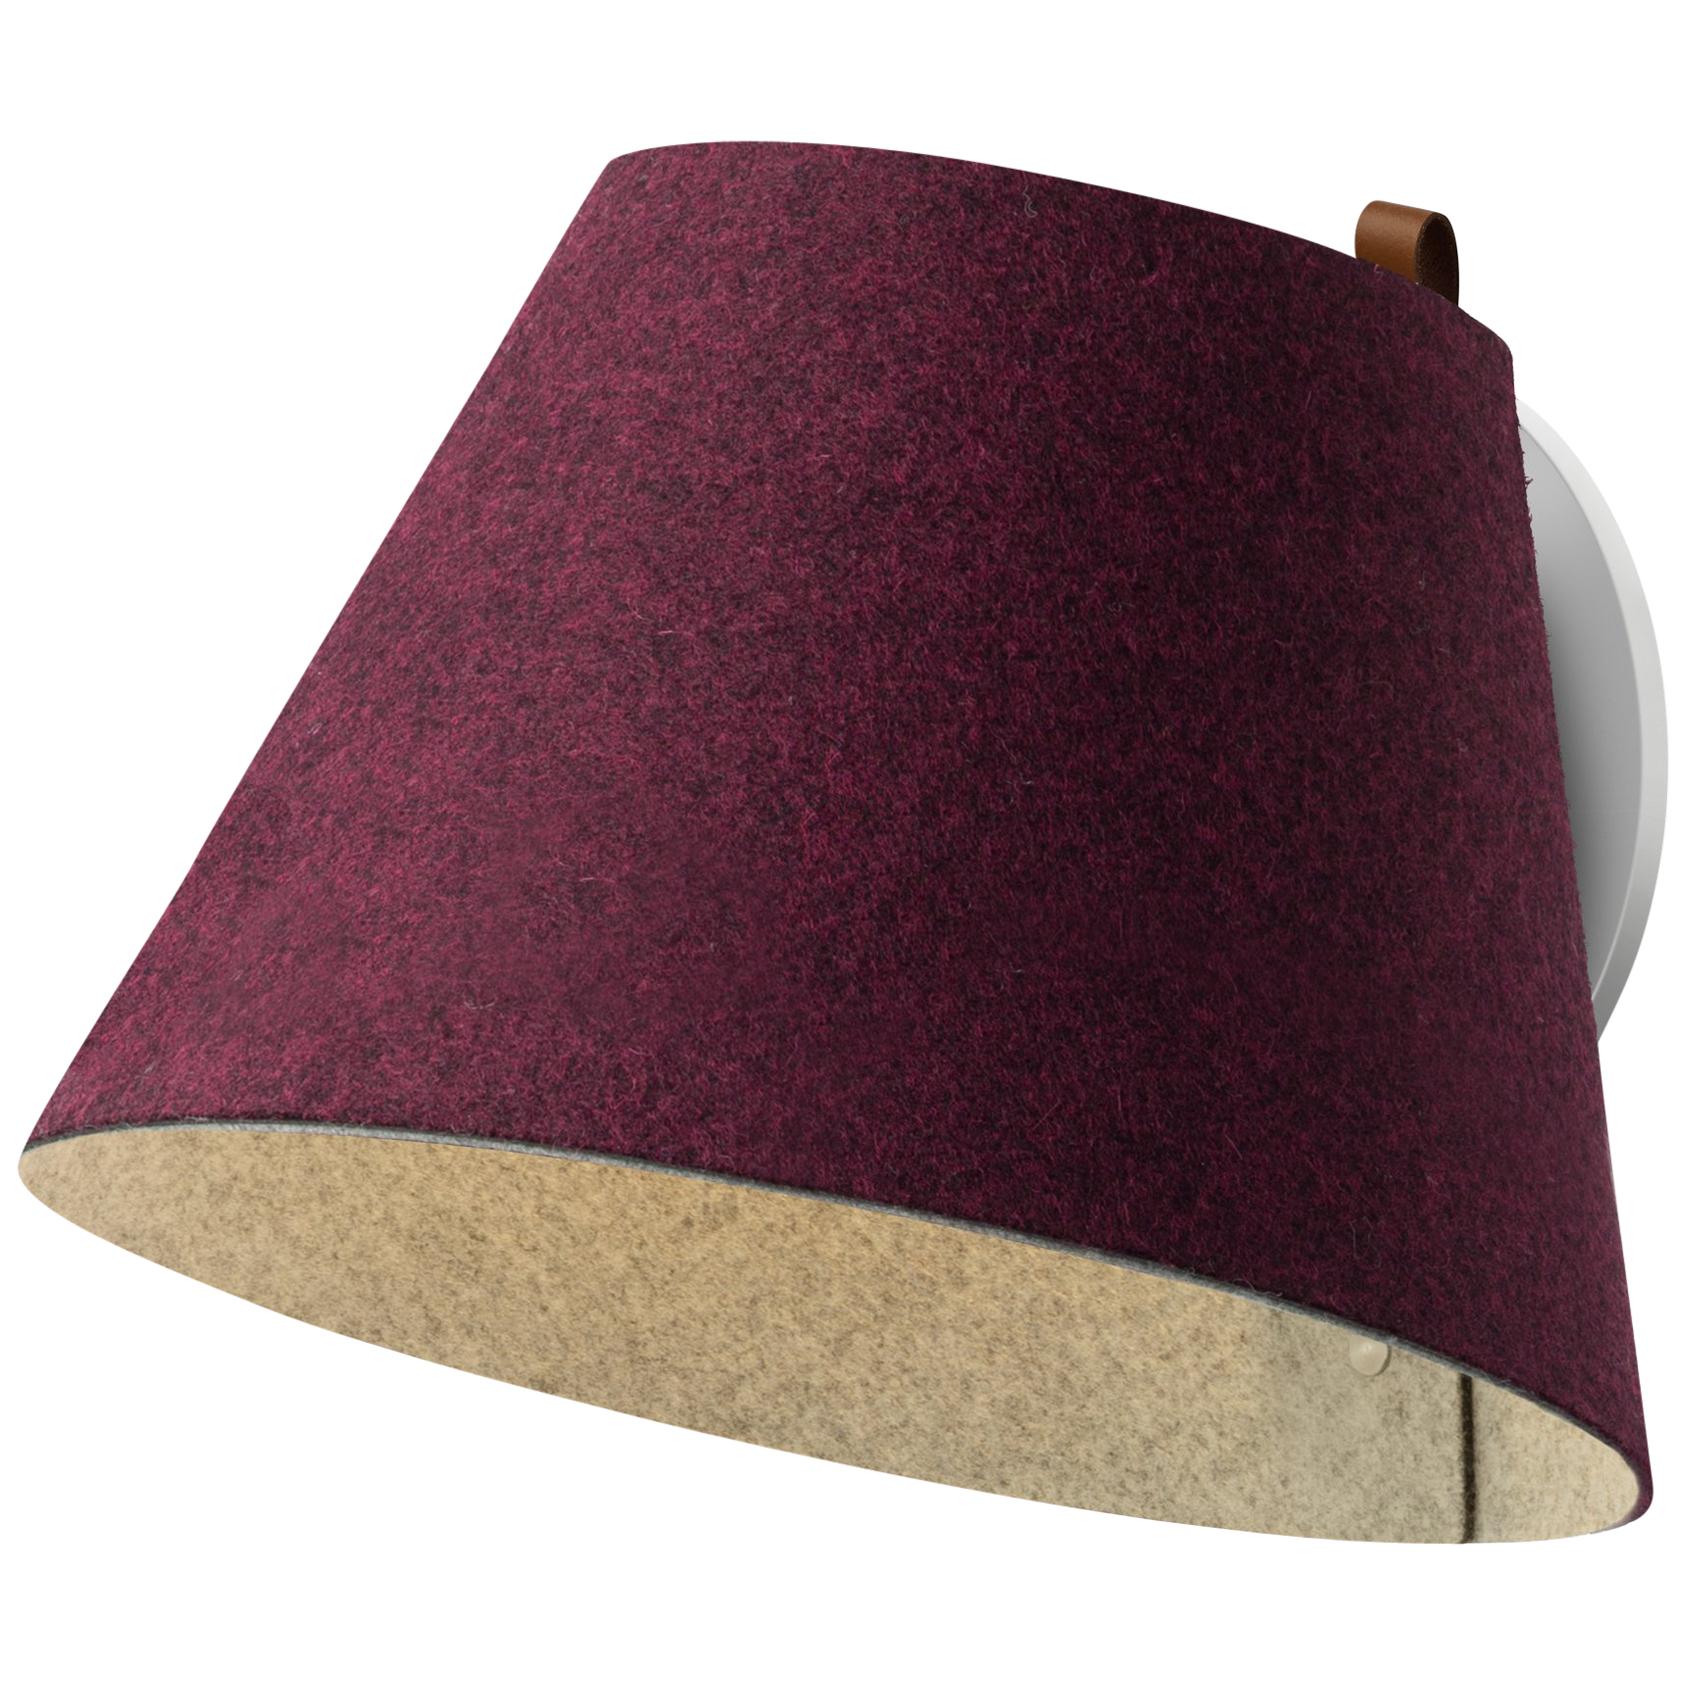 Lana Large Wall Light in Plum and Grey by Pablo Designs